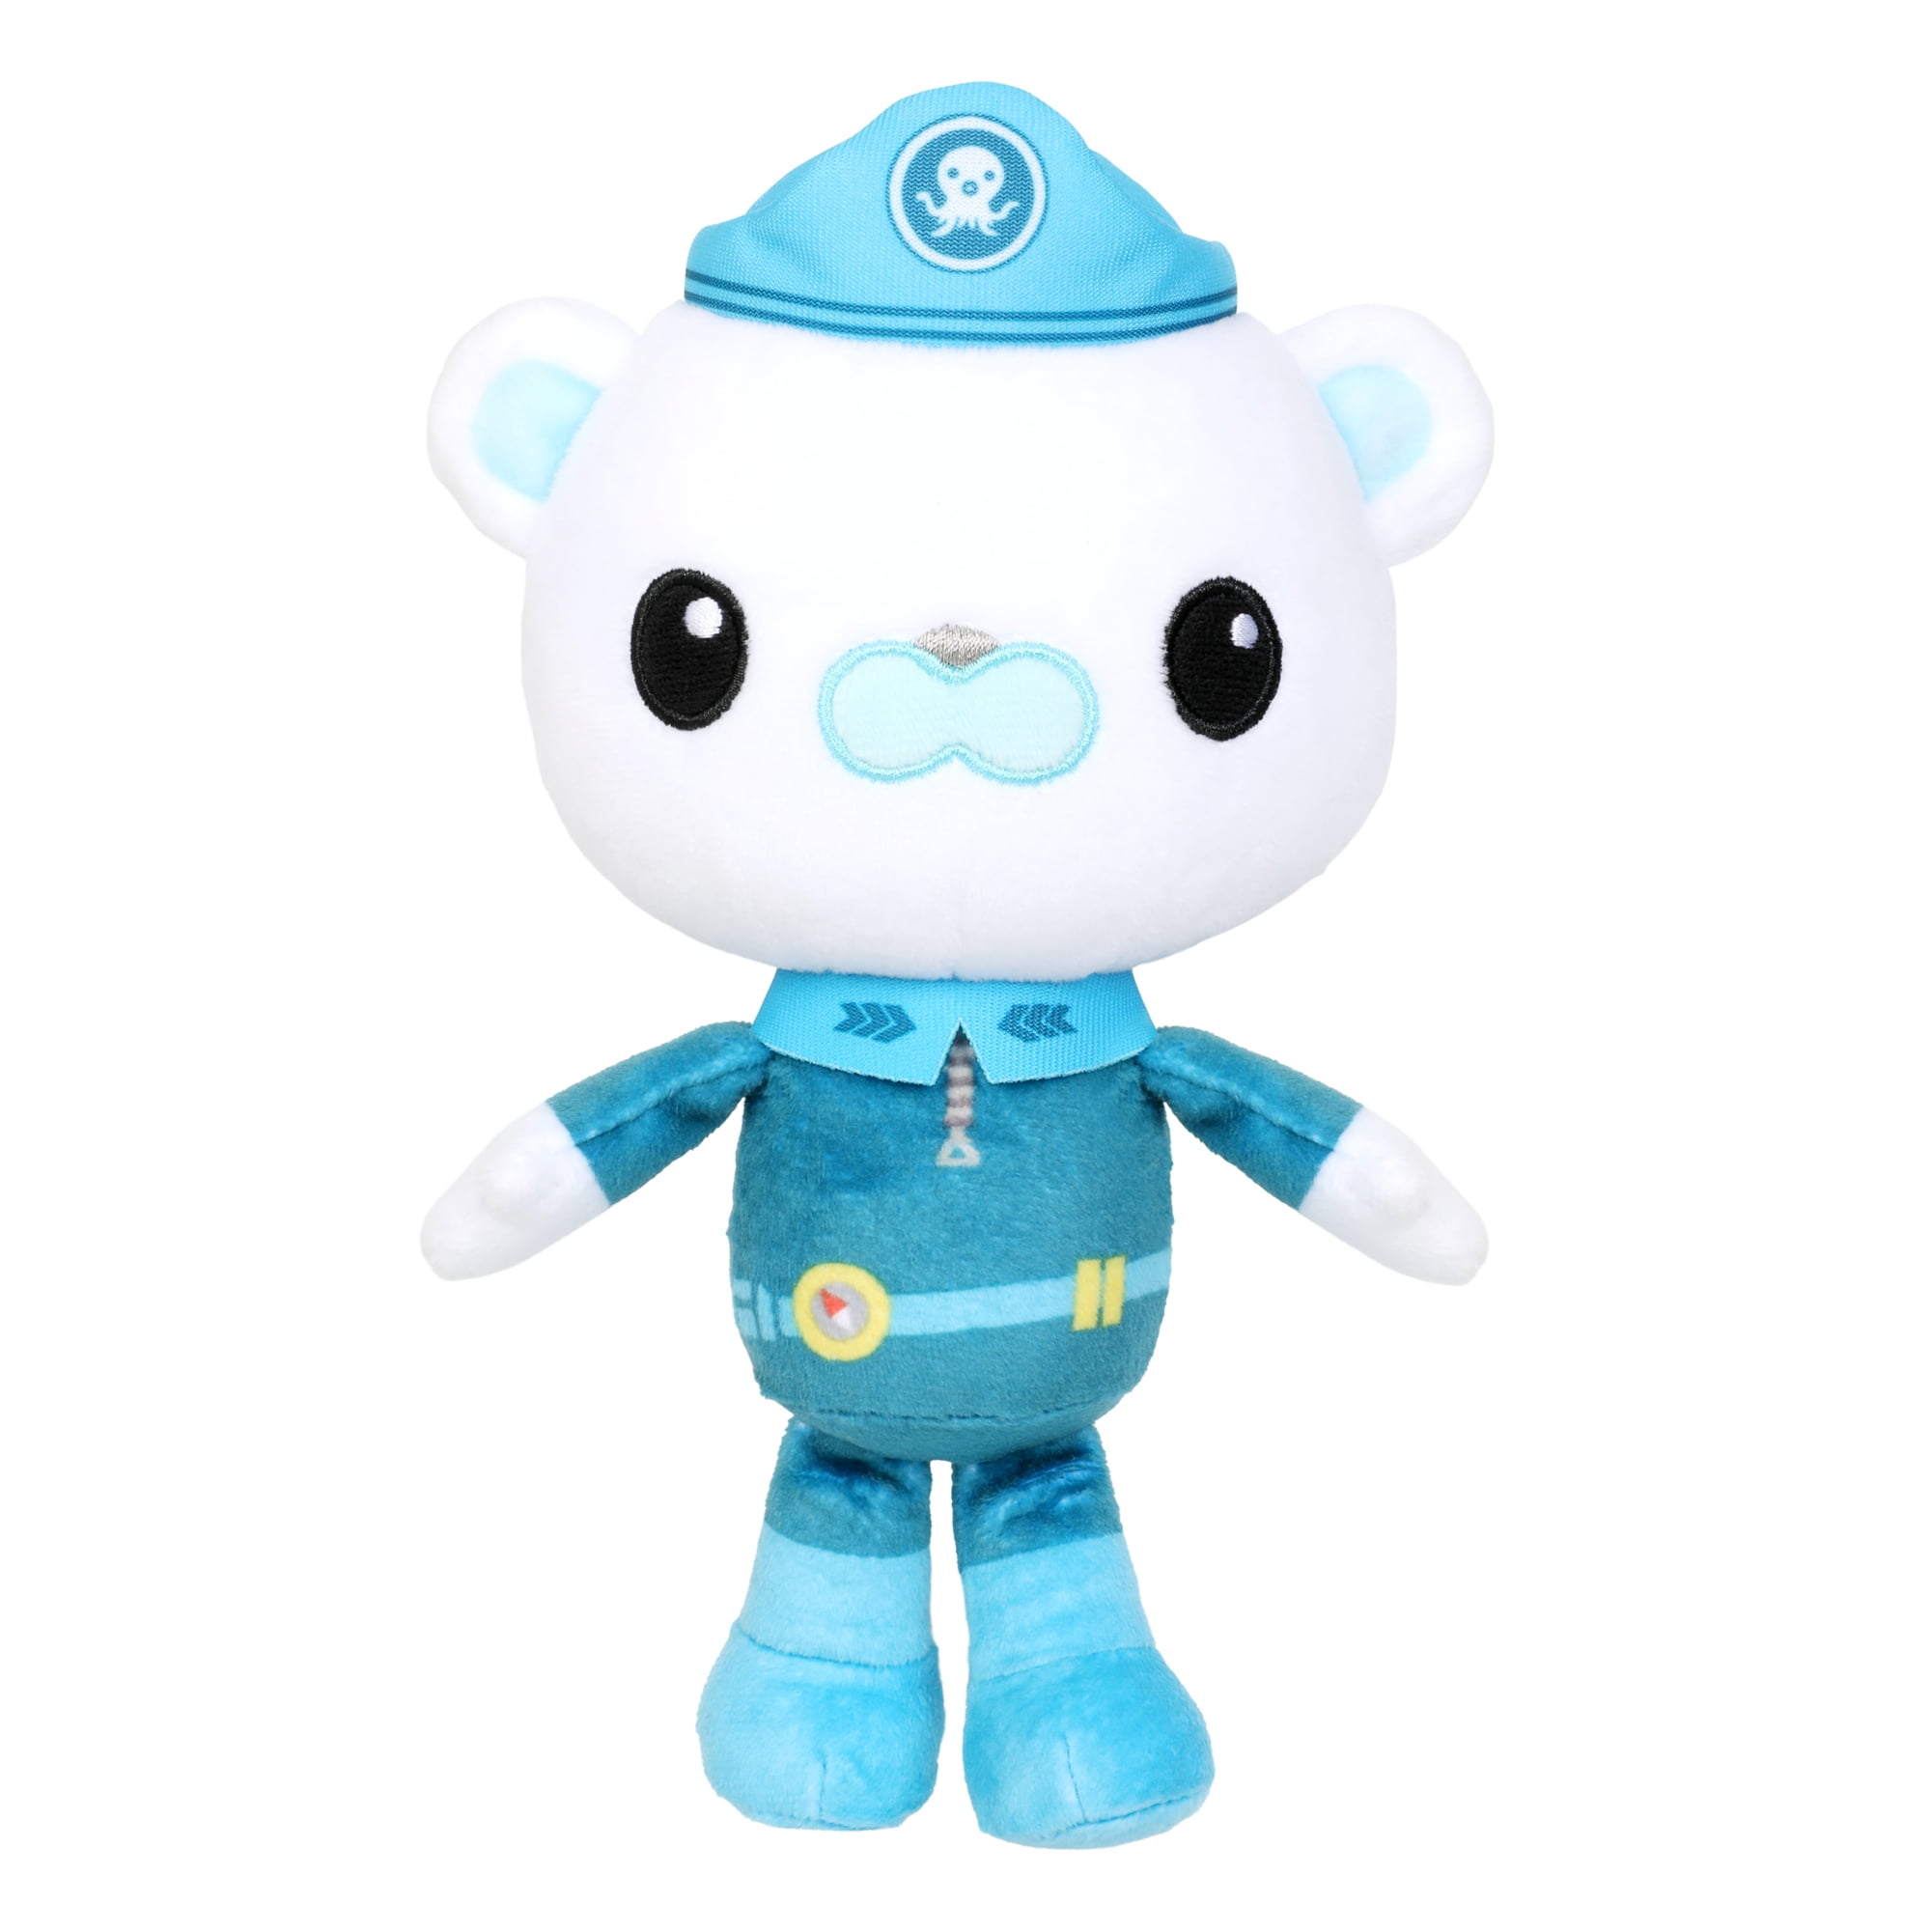 Octonauts Above & Beyond,  8" tall Plush Cuddly Toy, Styles may Vary, 4 To Collect, Toys for Kids, Preschool, Ages 3+